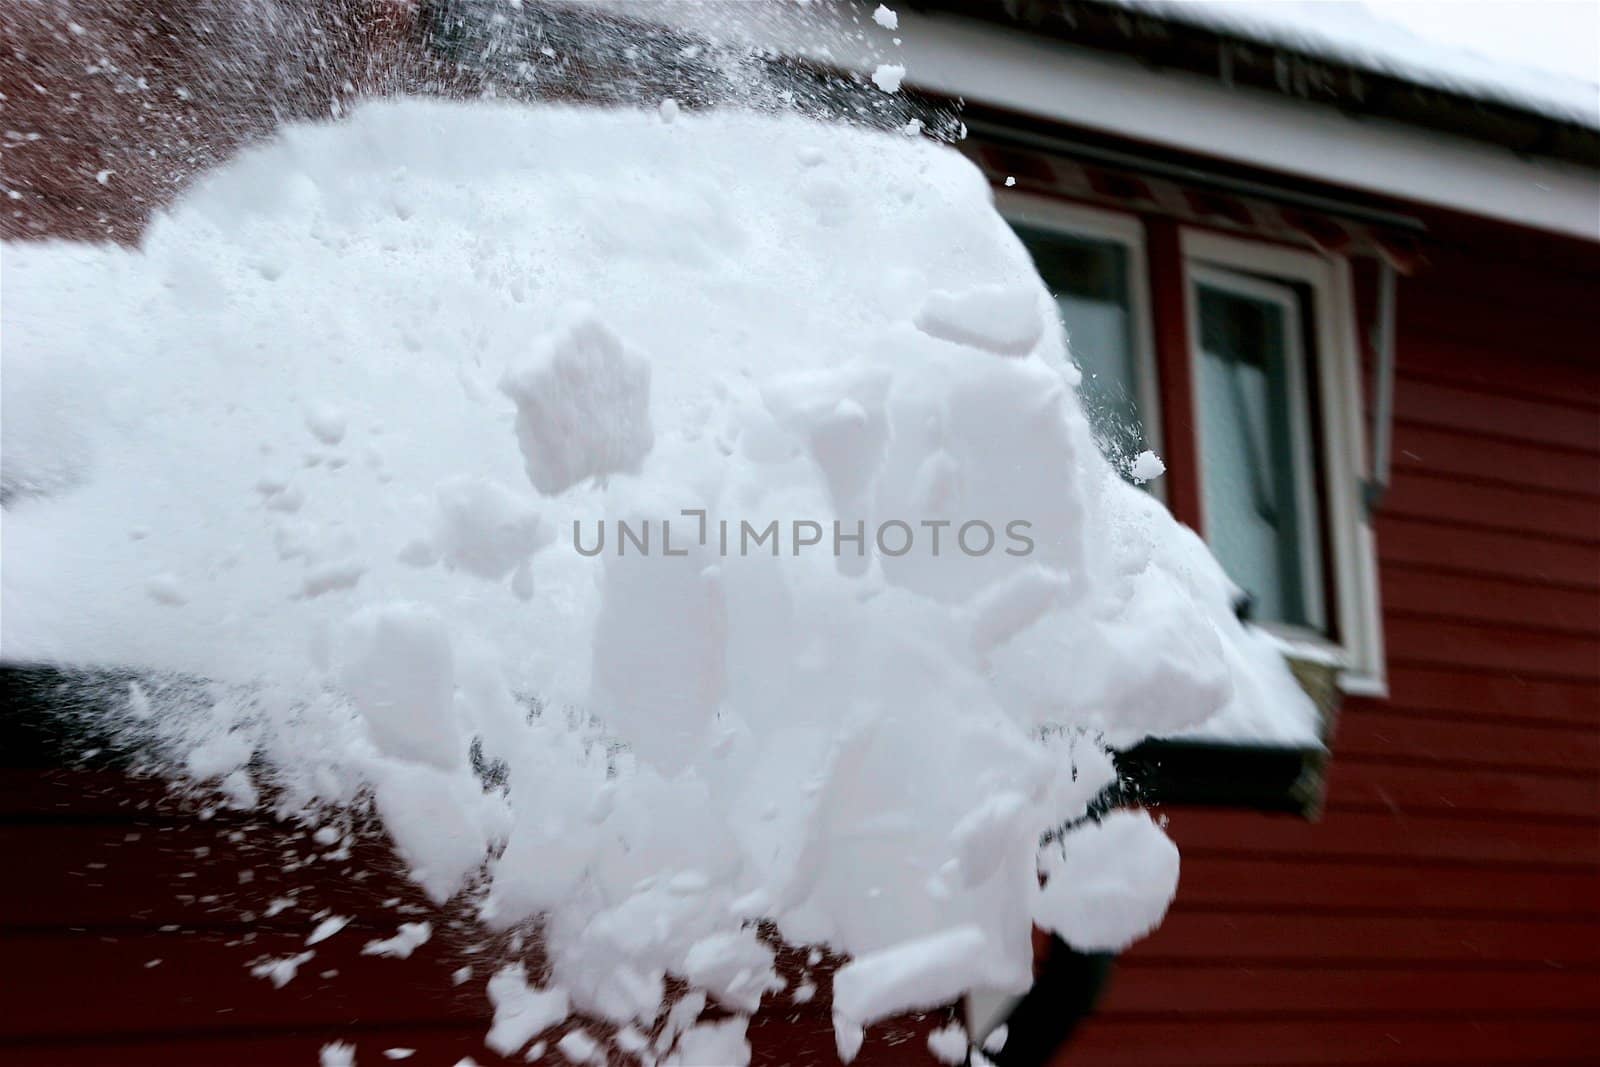 roof and window of a wooden small house covered with snow in the cold winter by Bildehagen